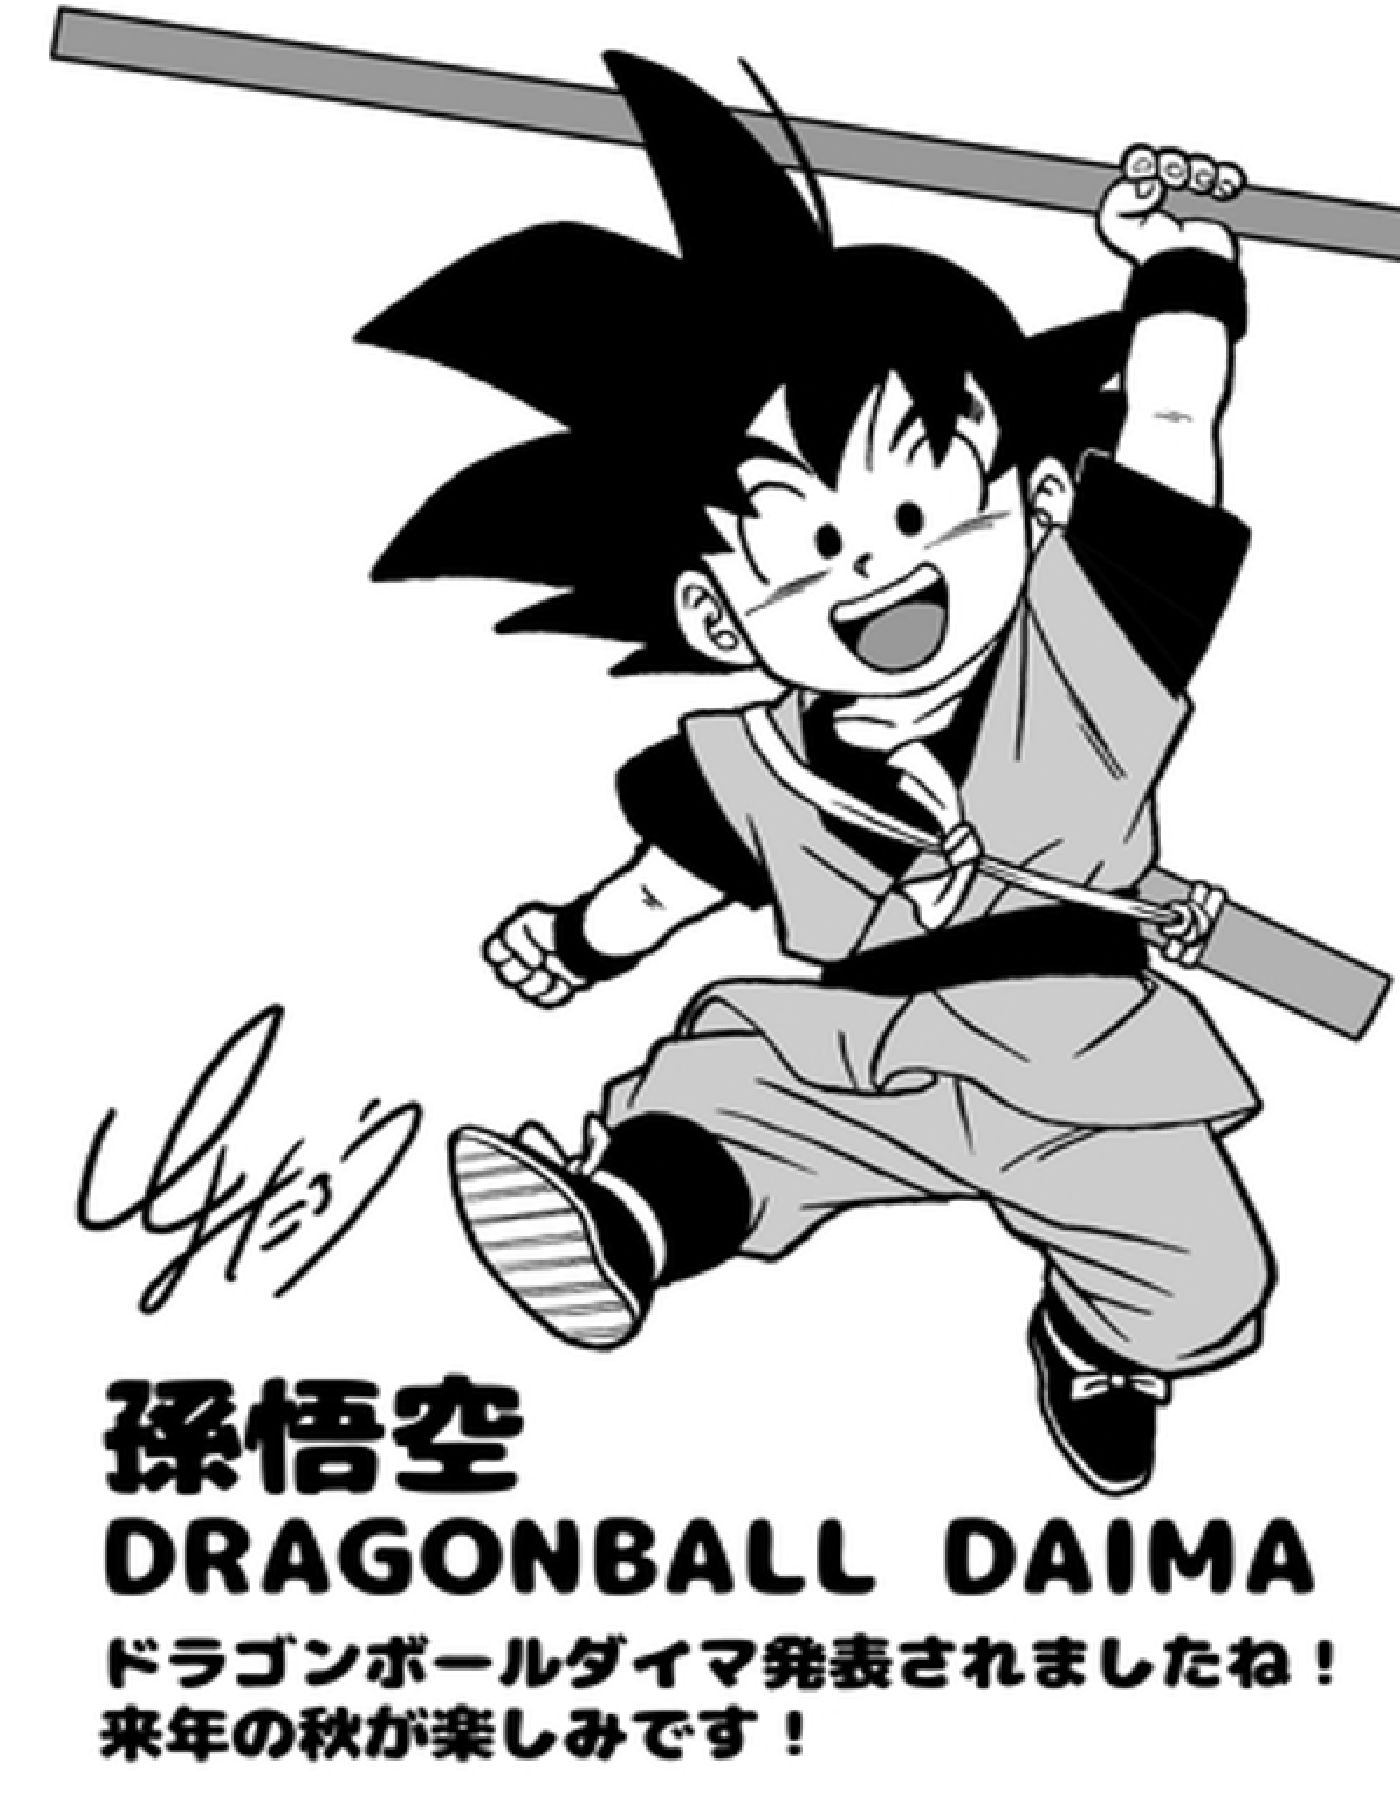 Dragon Ball Fans Get First Look At What DAIMA Will Look Like In The Manga